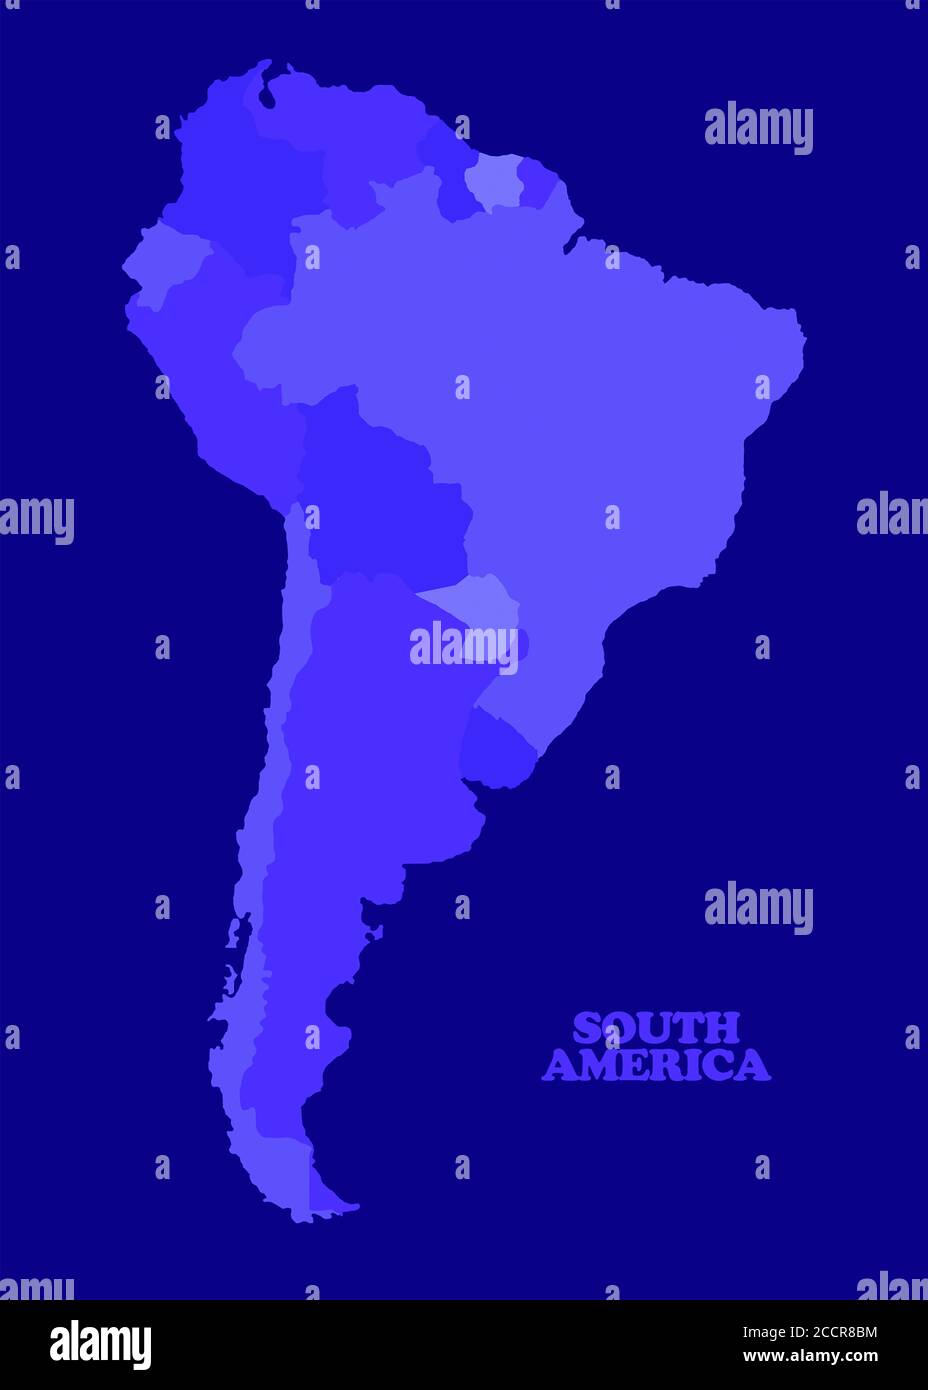 Illustrated Map of South America Stock Photo